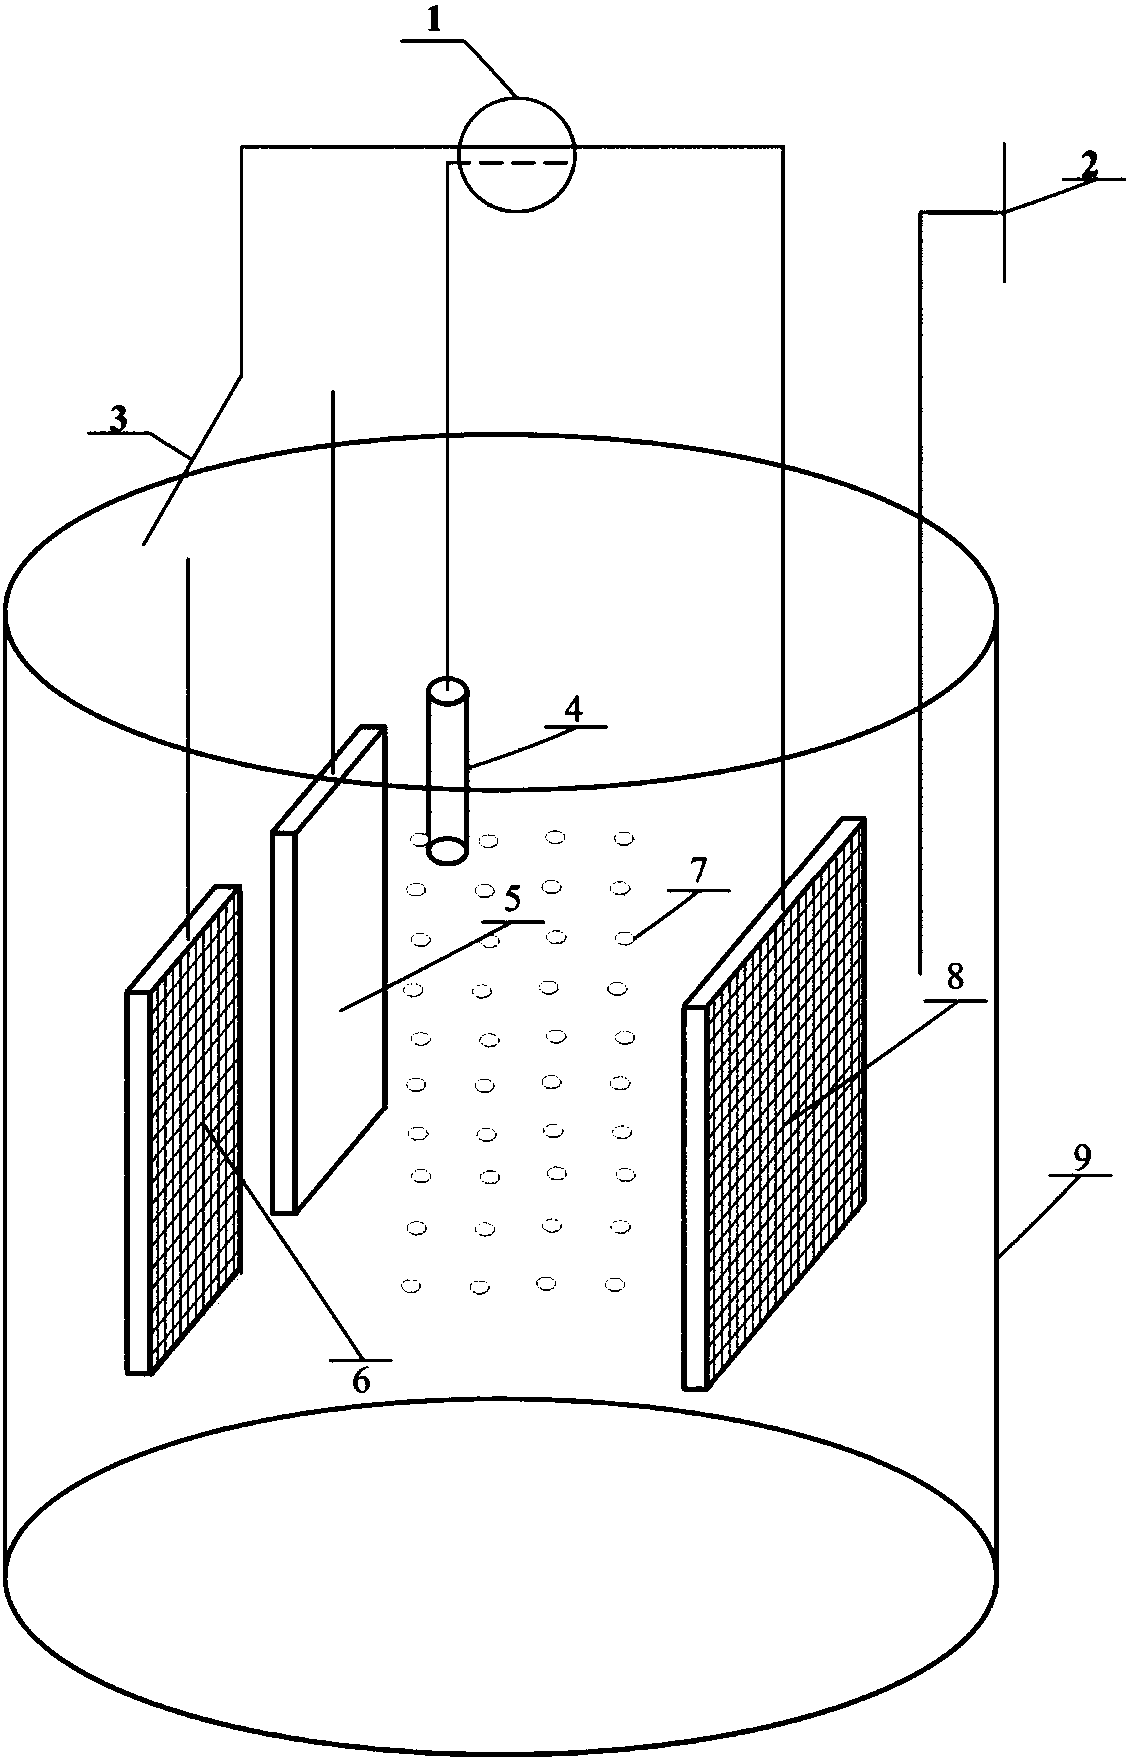 Method for simultaneous removal of nitrogen and phosphorus